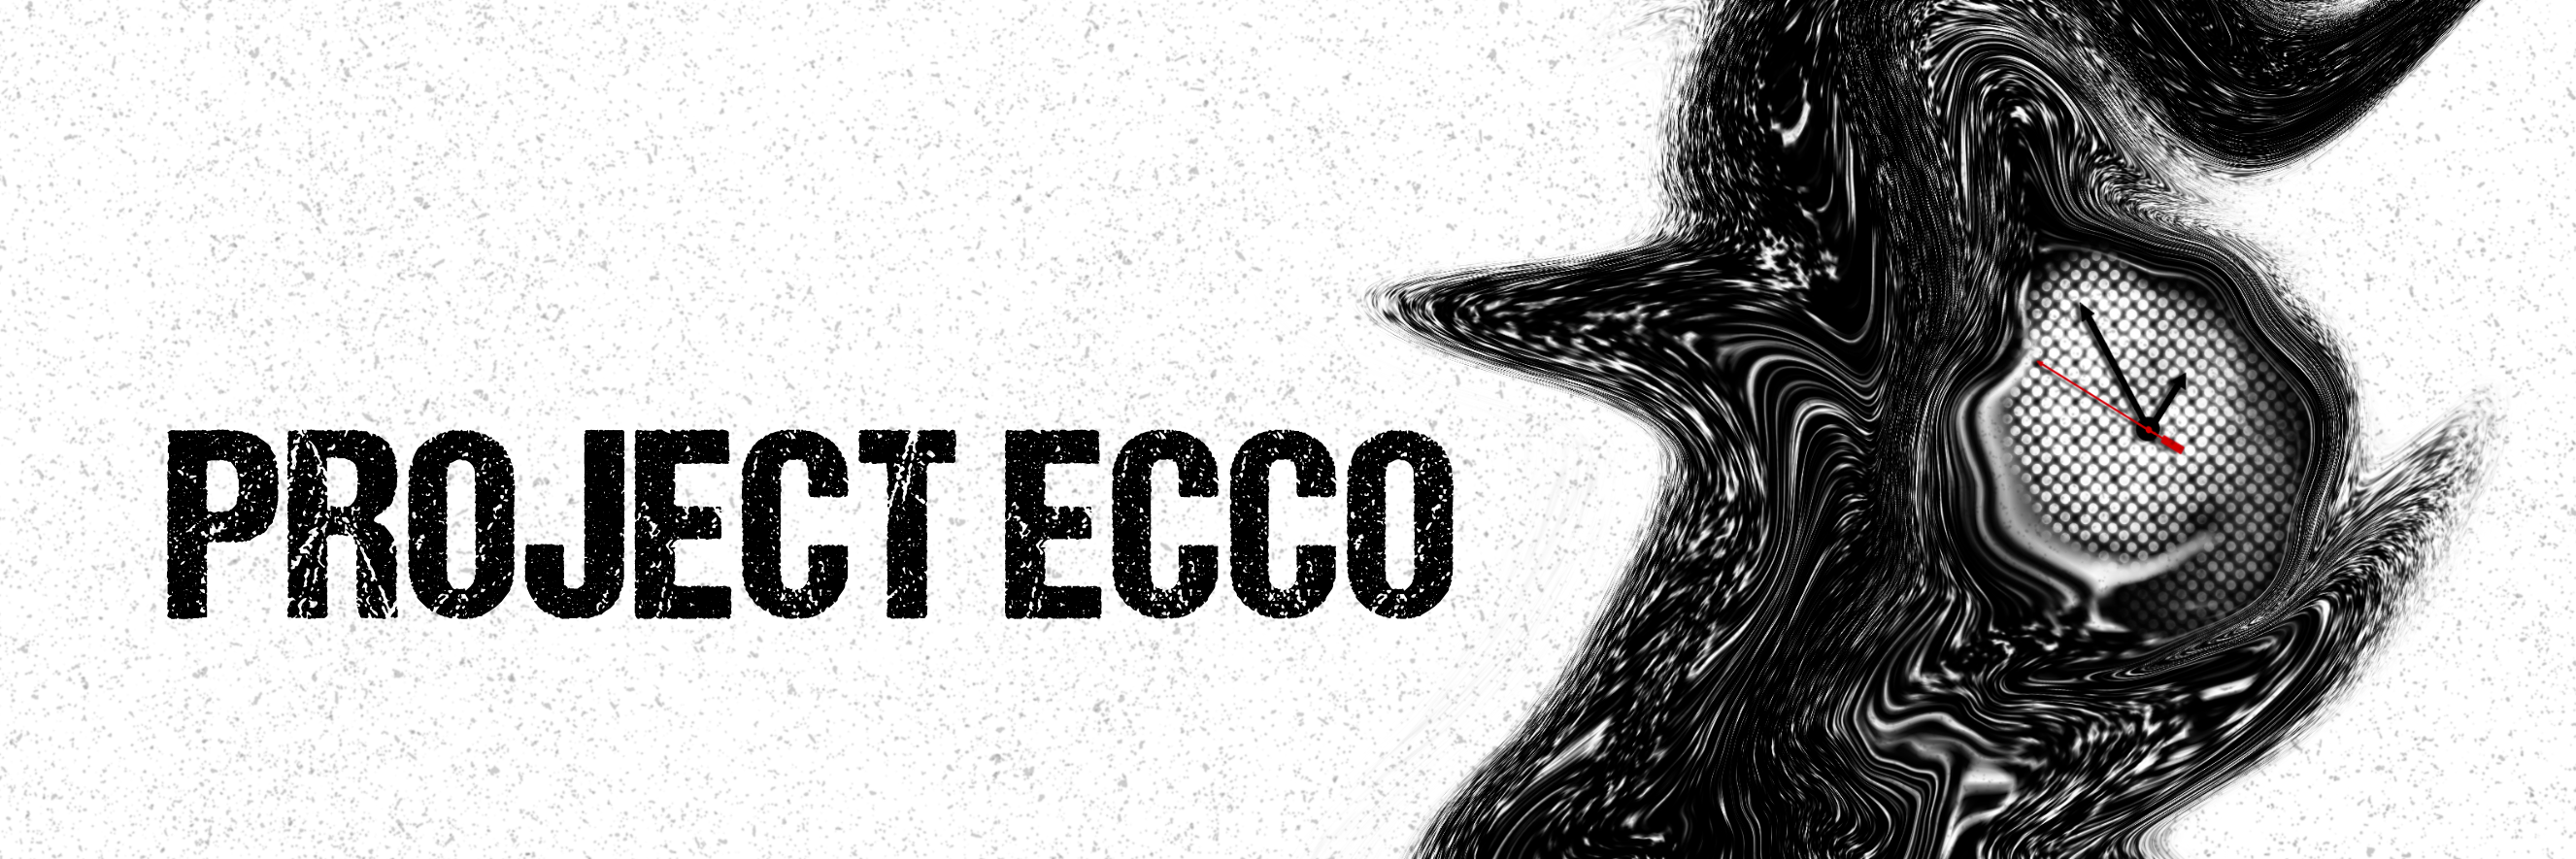 Project ECCO by Elliot